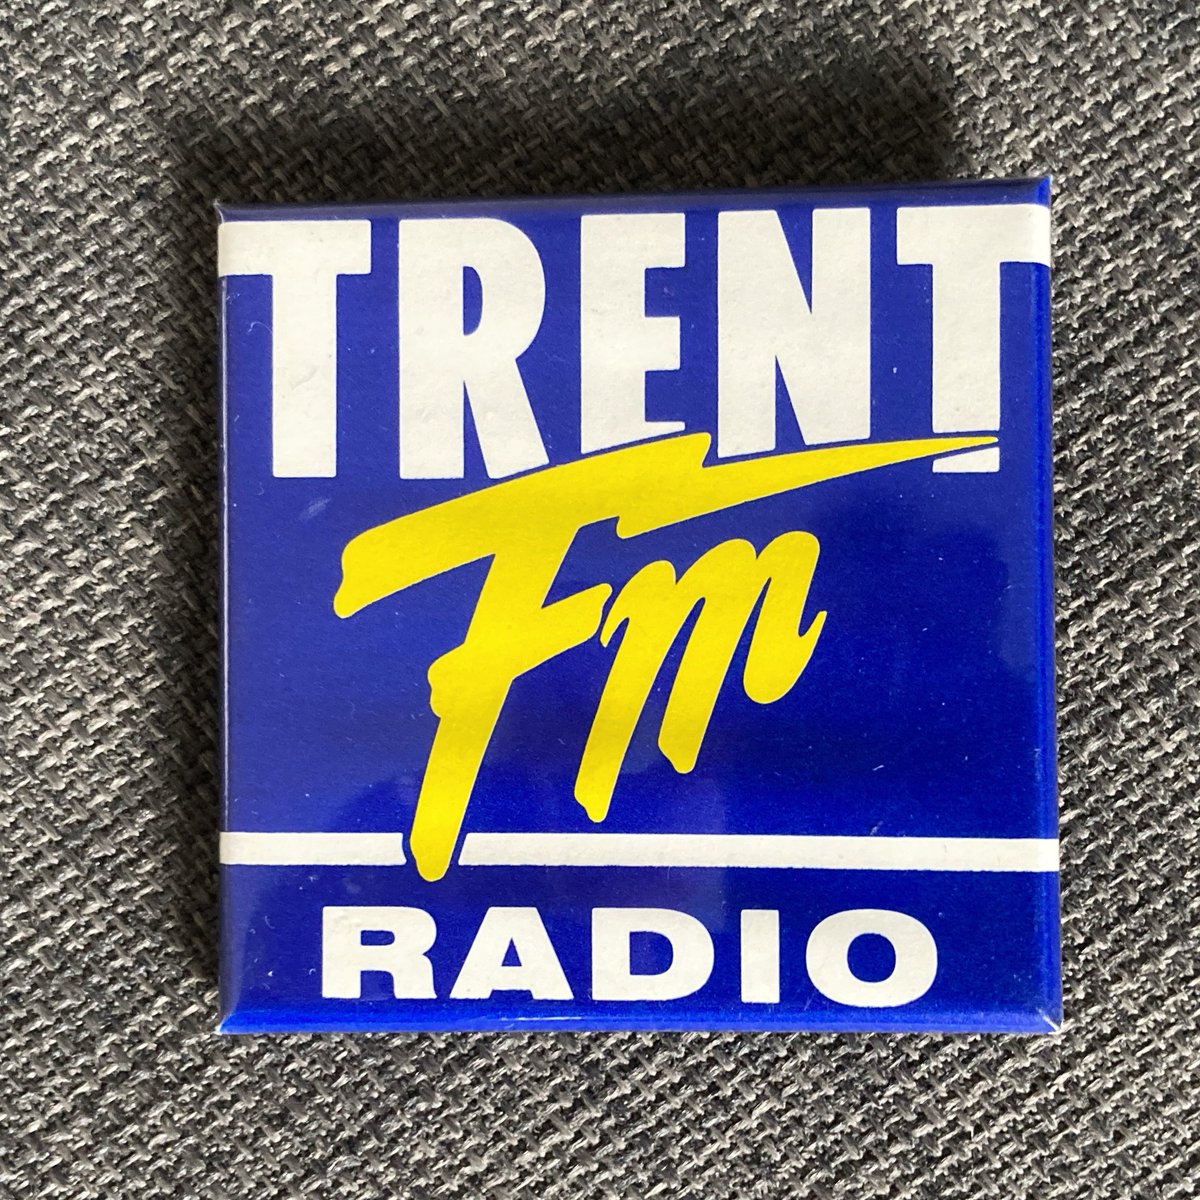 It was hip to be square in the 90s - especially according to this Trent FM badge.

We guess it makes sense though that, if you have a square logo, you make a square badge!

#radiomerch #trentfm #nottingham @RadioMugs #saturdaymerch #badges #anorak